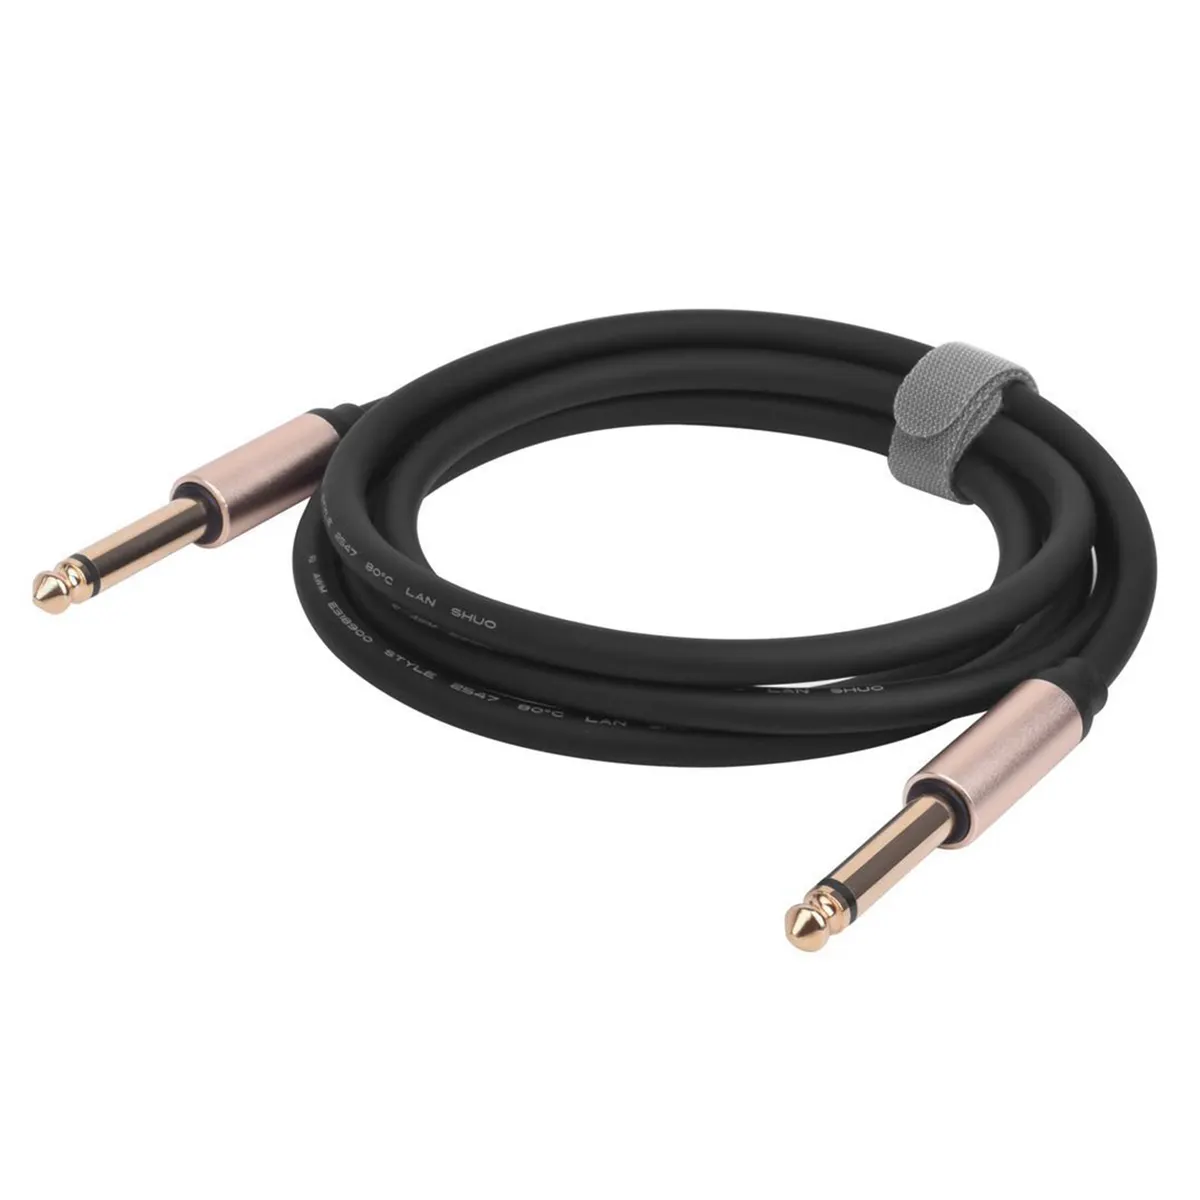 6.5mm Jack Audio Cable 6.35 Jack Male to Male Aux Cable for Guitar Mixer Amplifier